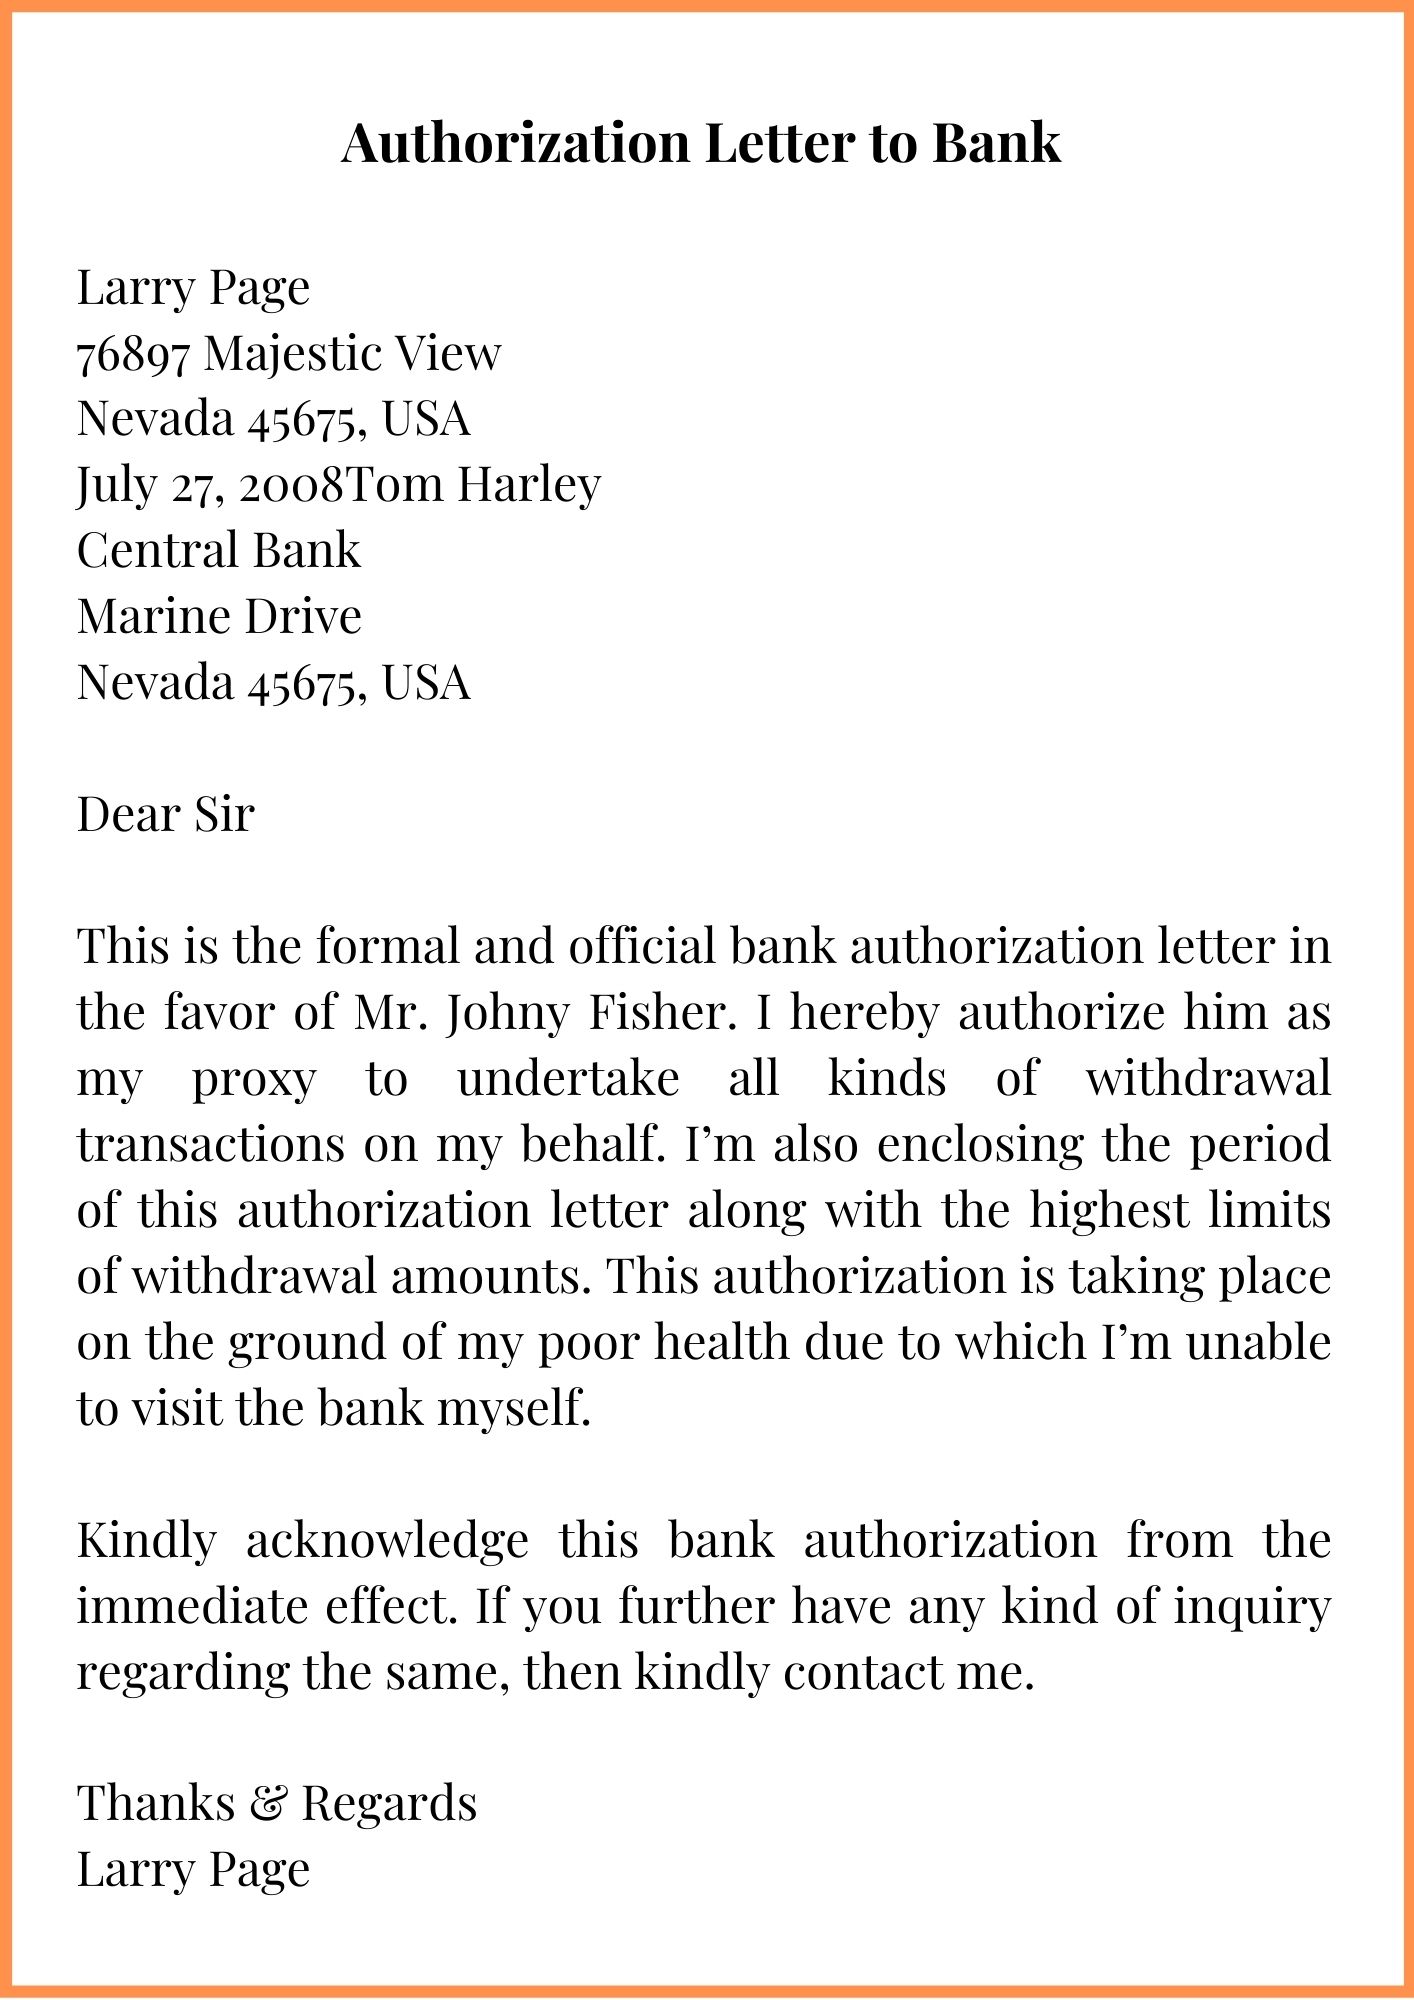 authorization-letter-for-bank-how-to-write-6-sample-letters-gambaran